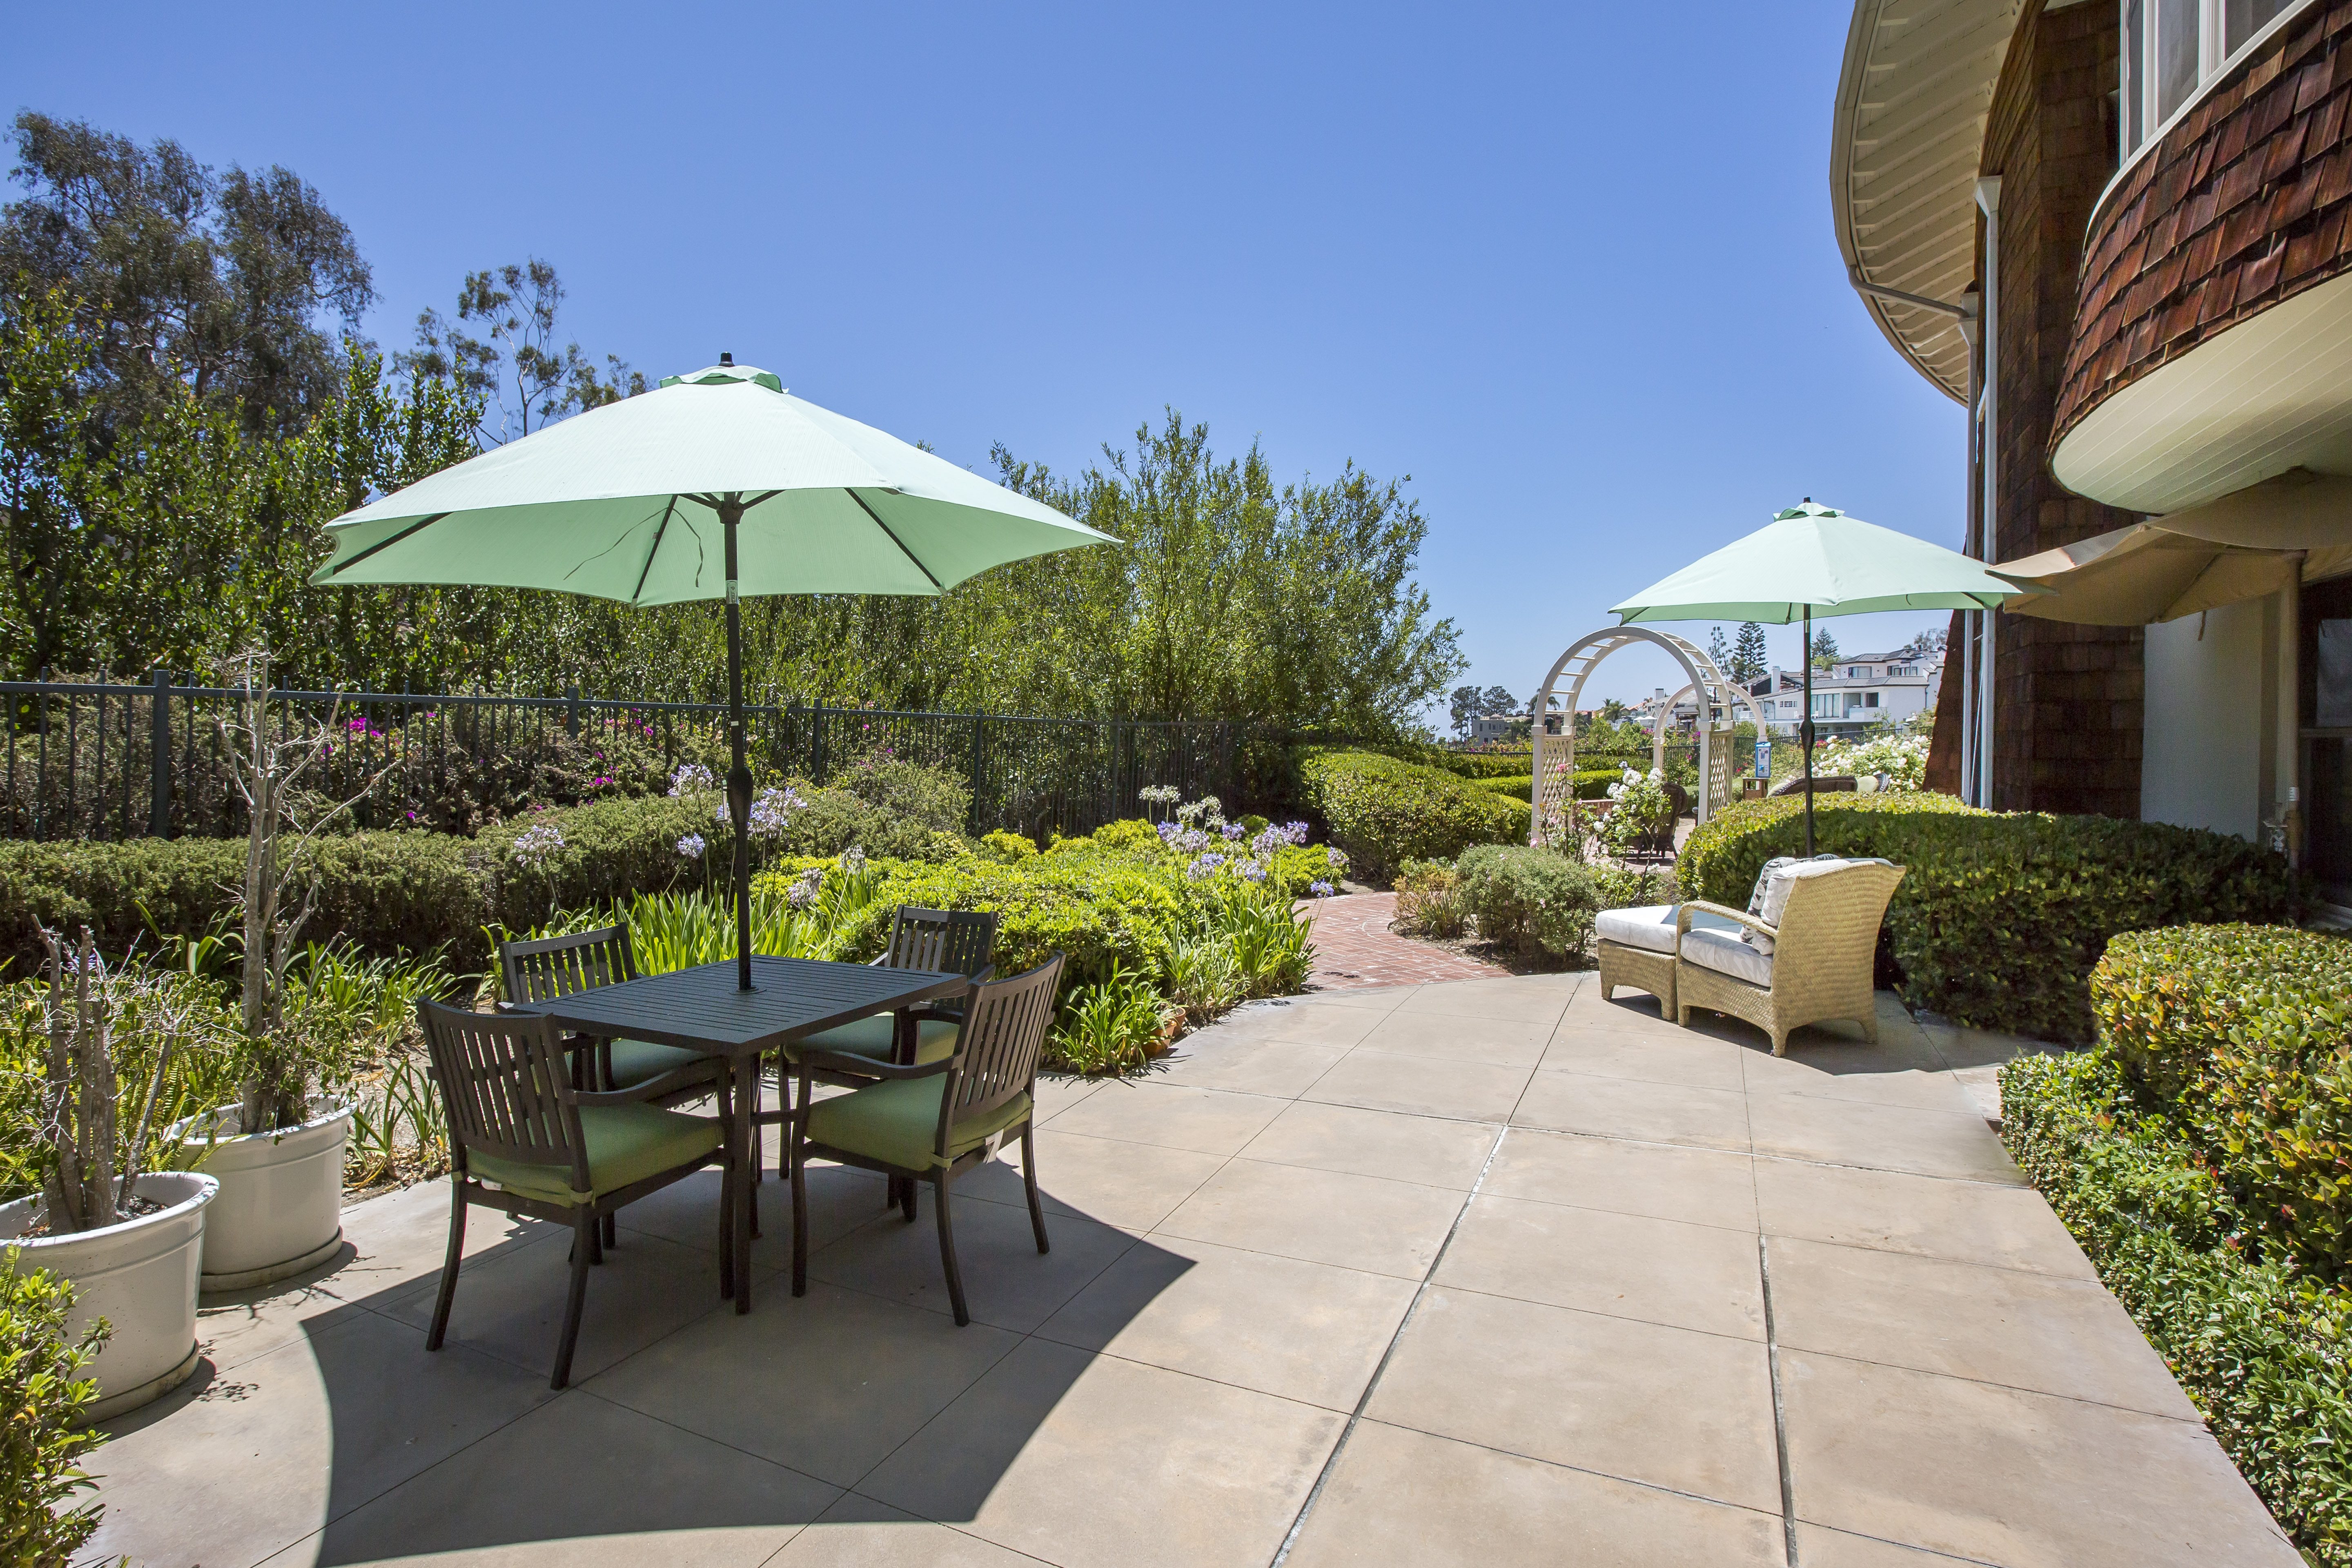 outdoor patio with tables, chairs and umbrellas in garden area